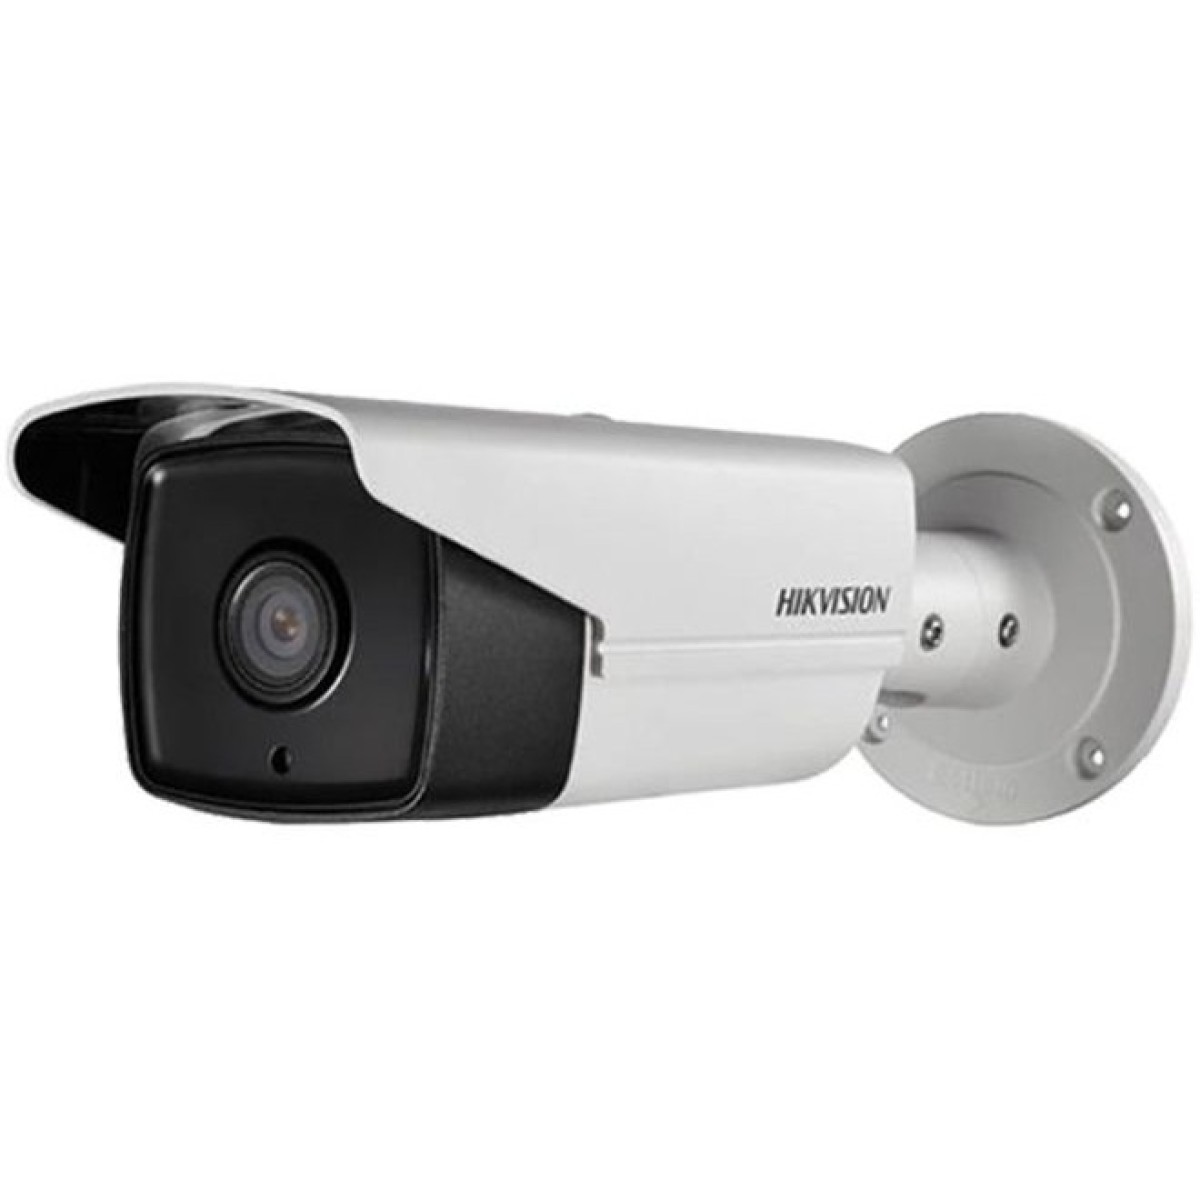 IP-камера Hikvision DS-2CD2T85FWD-I8 (2.8) 256_256.jpg